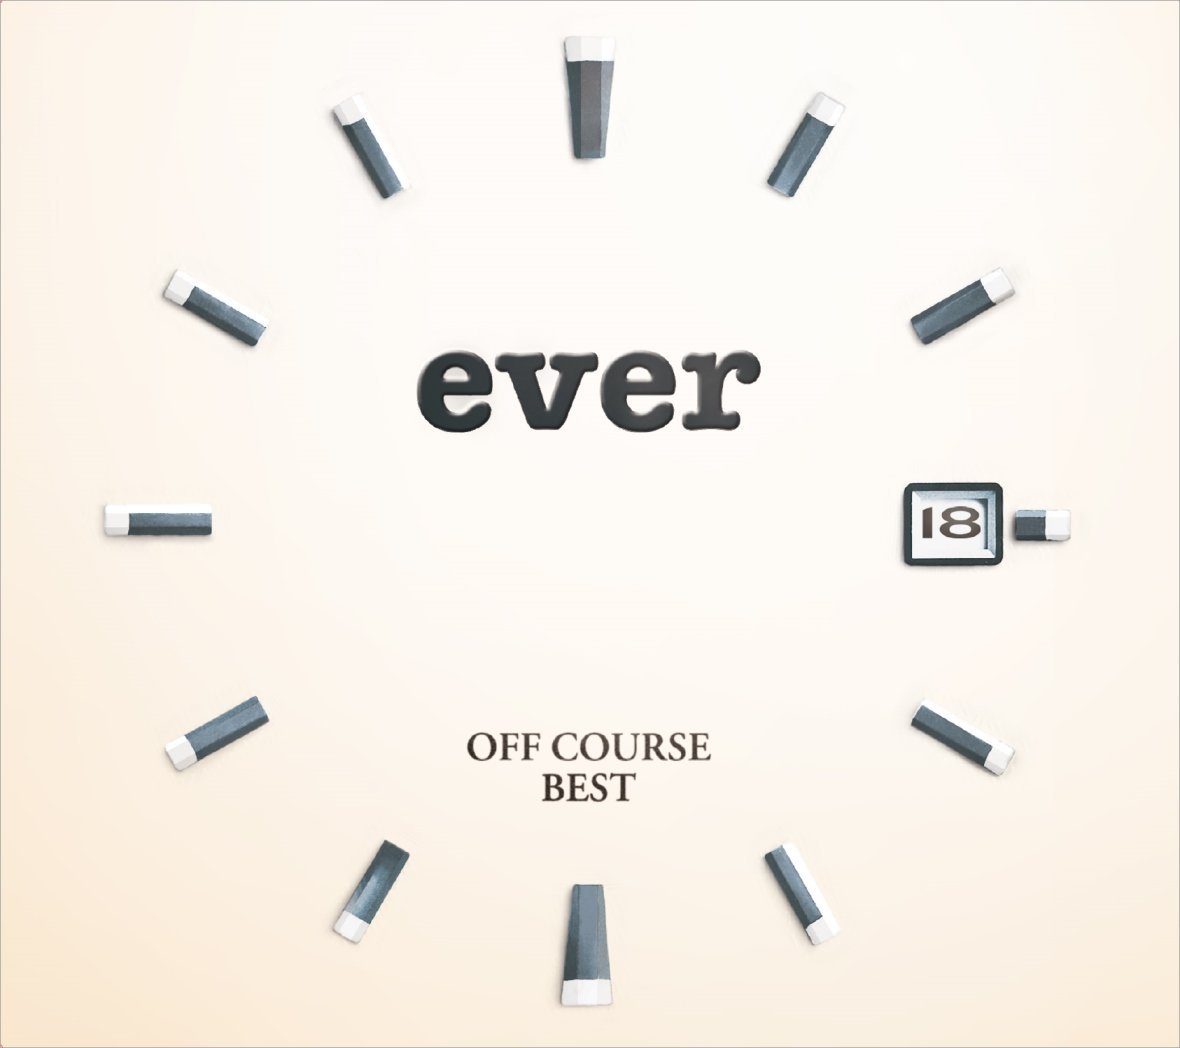 OFF COURSE BEST ”ever”